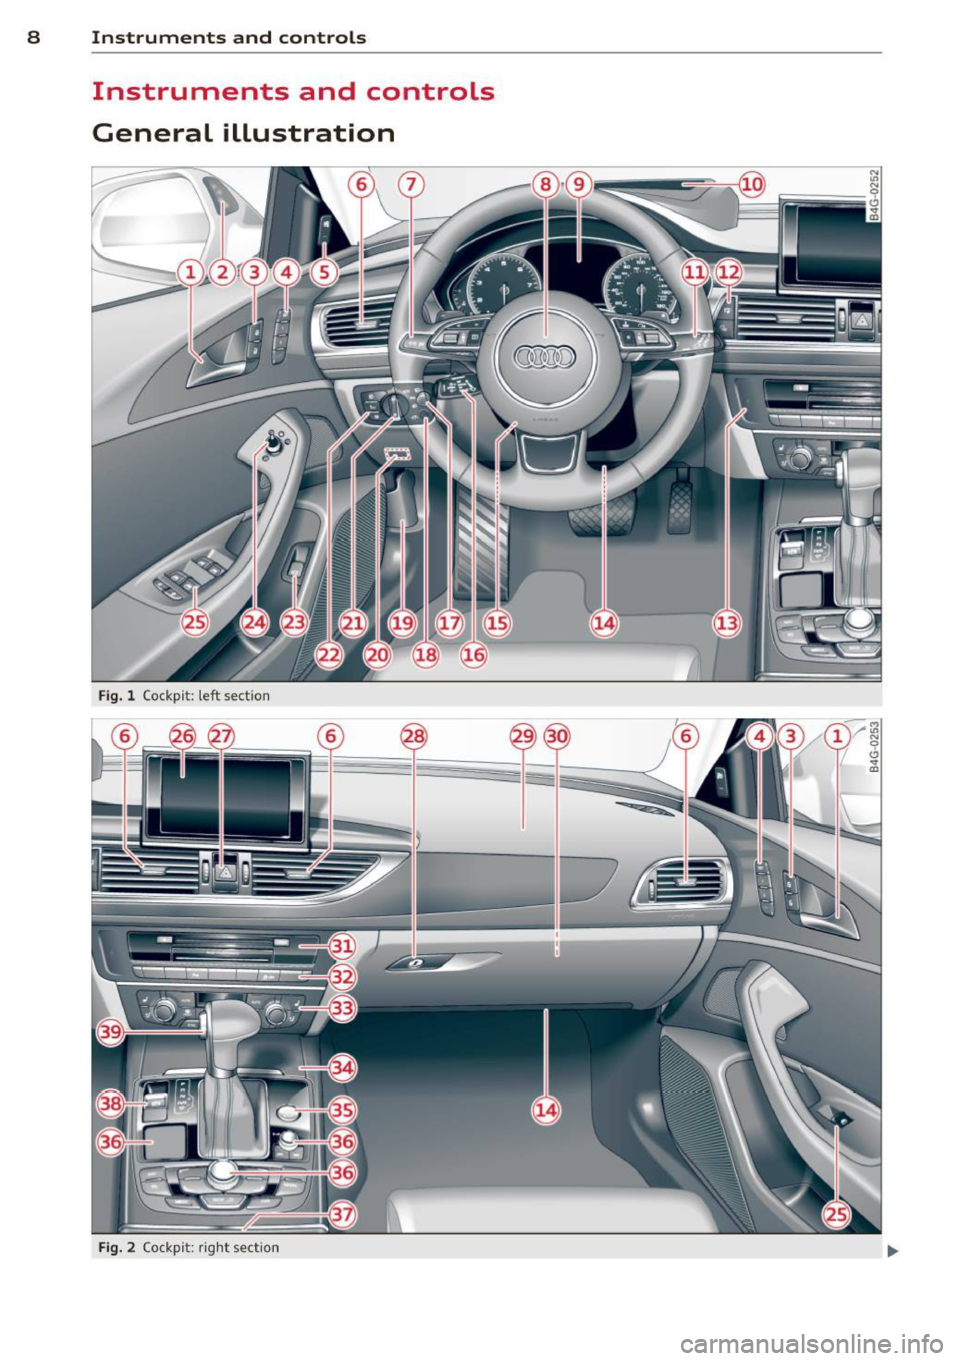 AUDI A6 2013  Owners Manual 8  Instruments and controls 
Instruments  and  controls 
General  illustration 
Fig. l Cockp it:  left  sect io n 
Fig. 2 Co ck pi t: ri ght  sect io n  